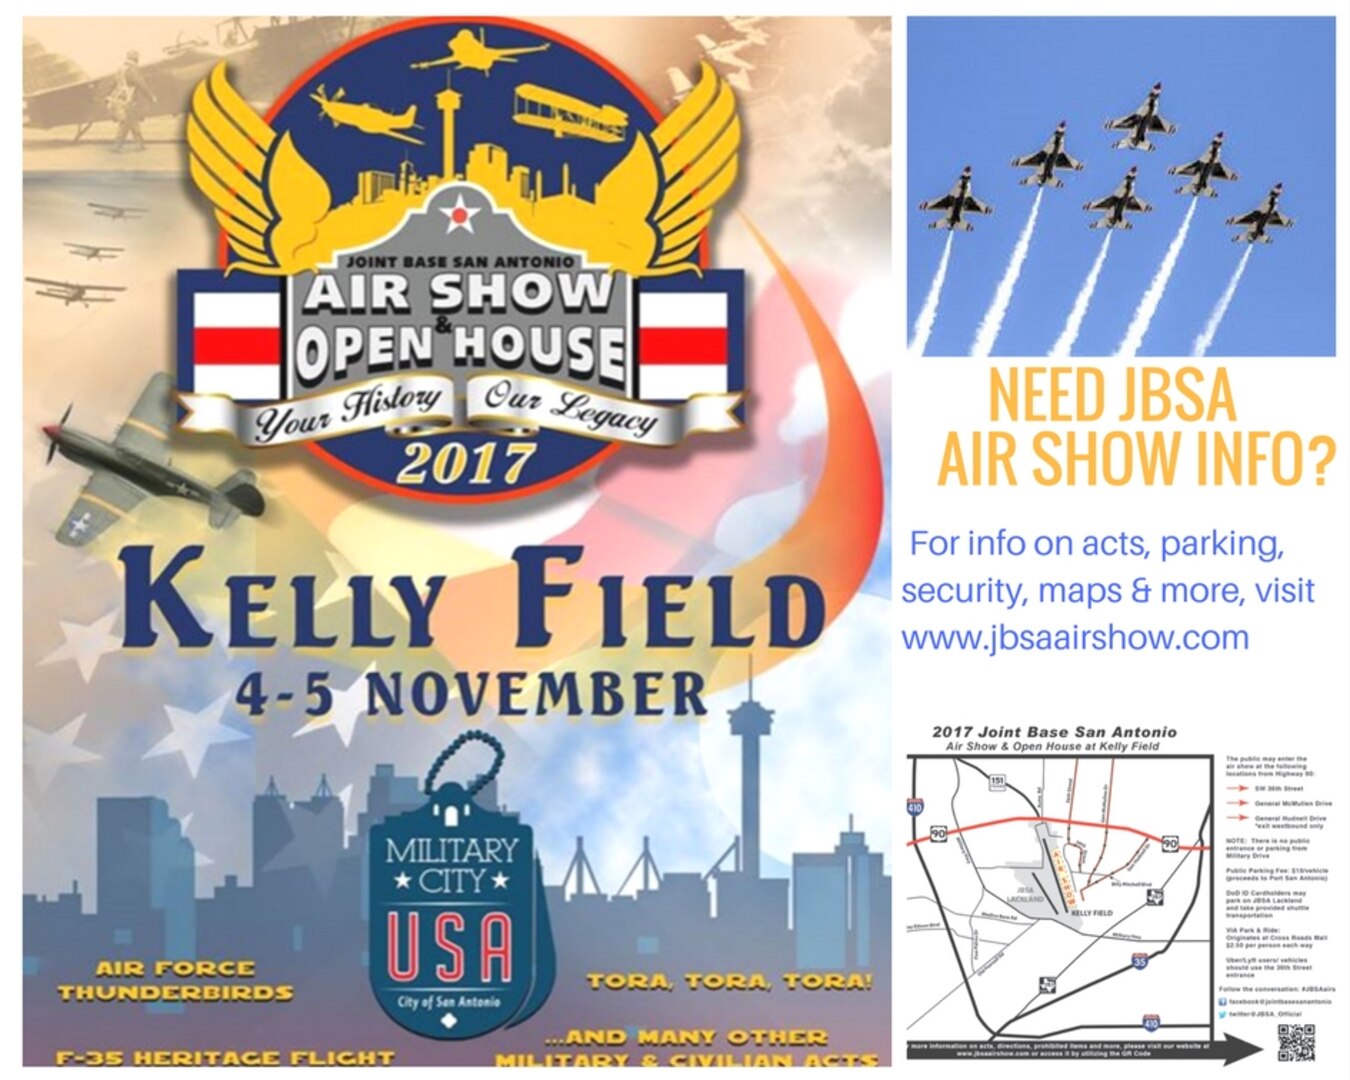 2017 JBSA Air Show and Open House website infographic